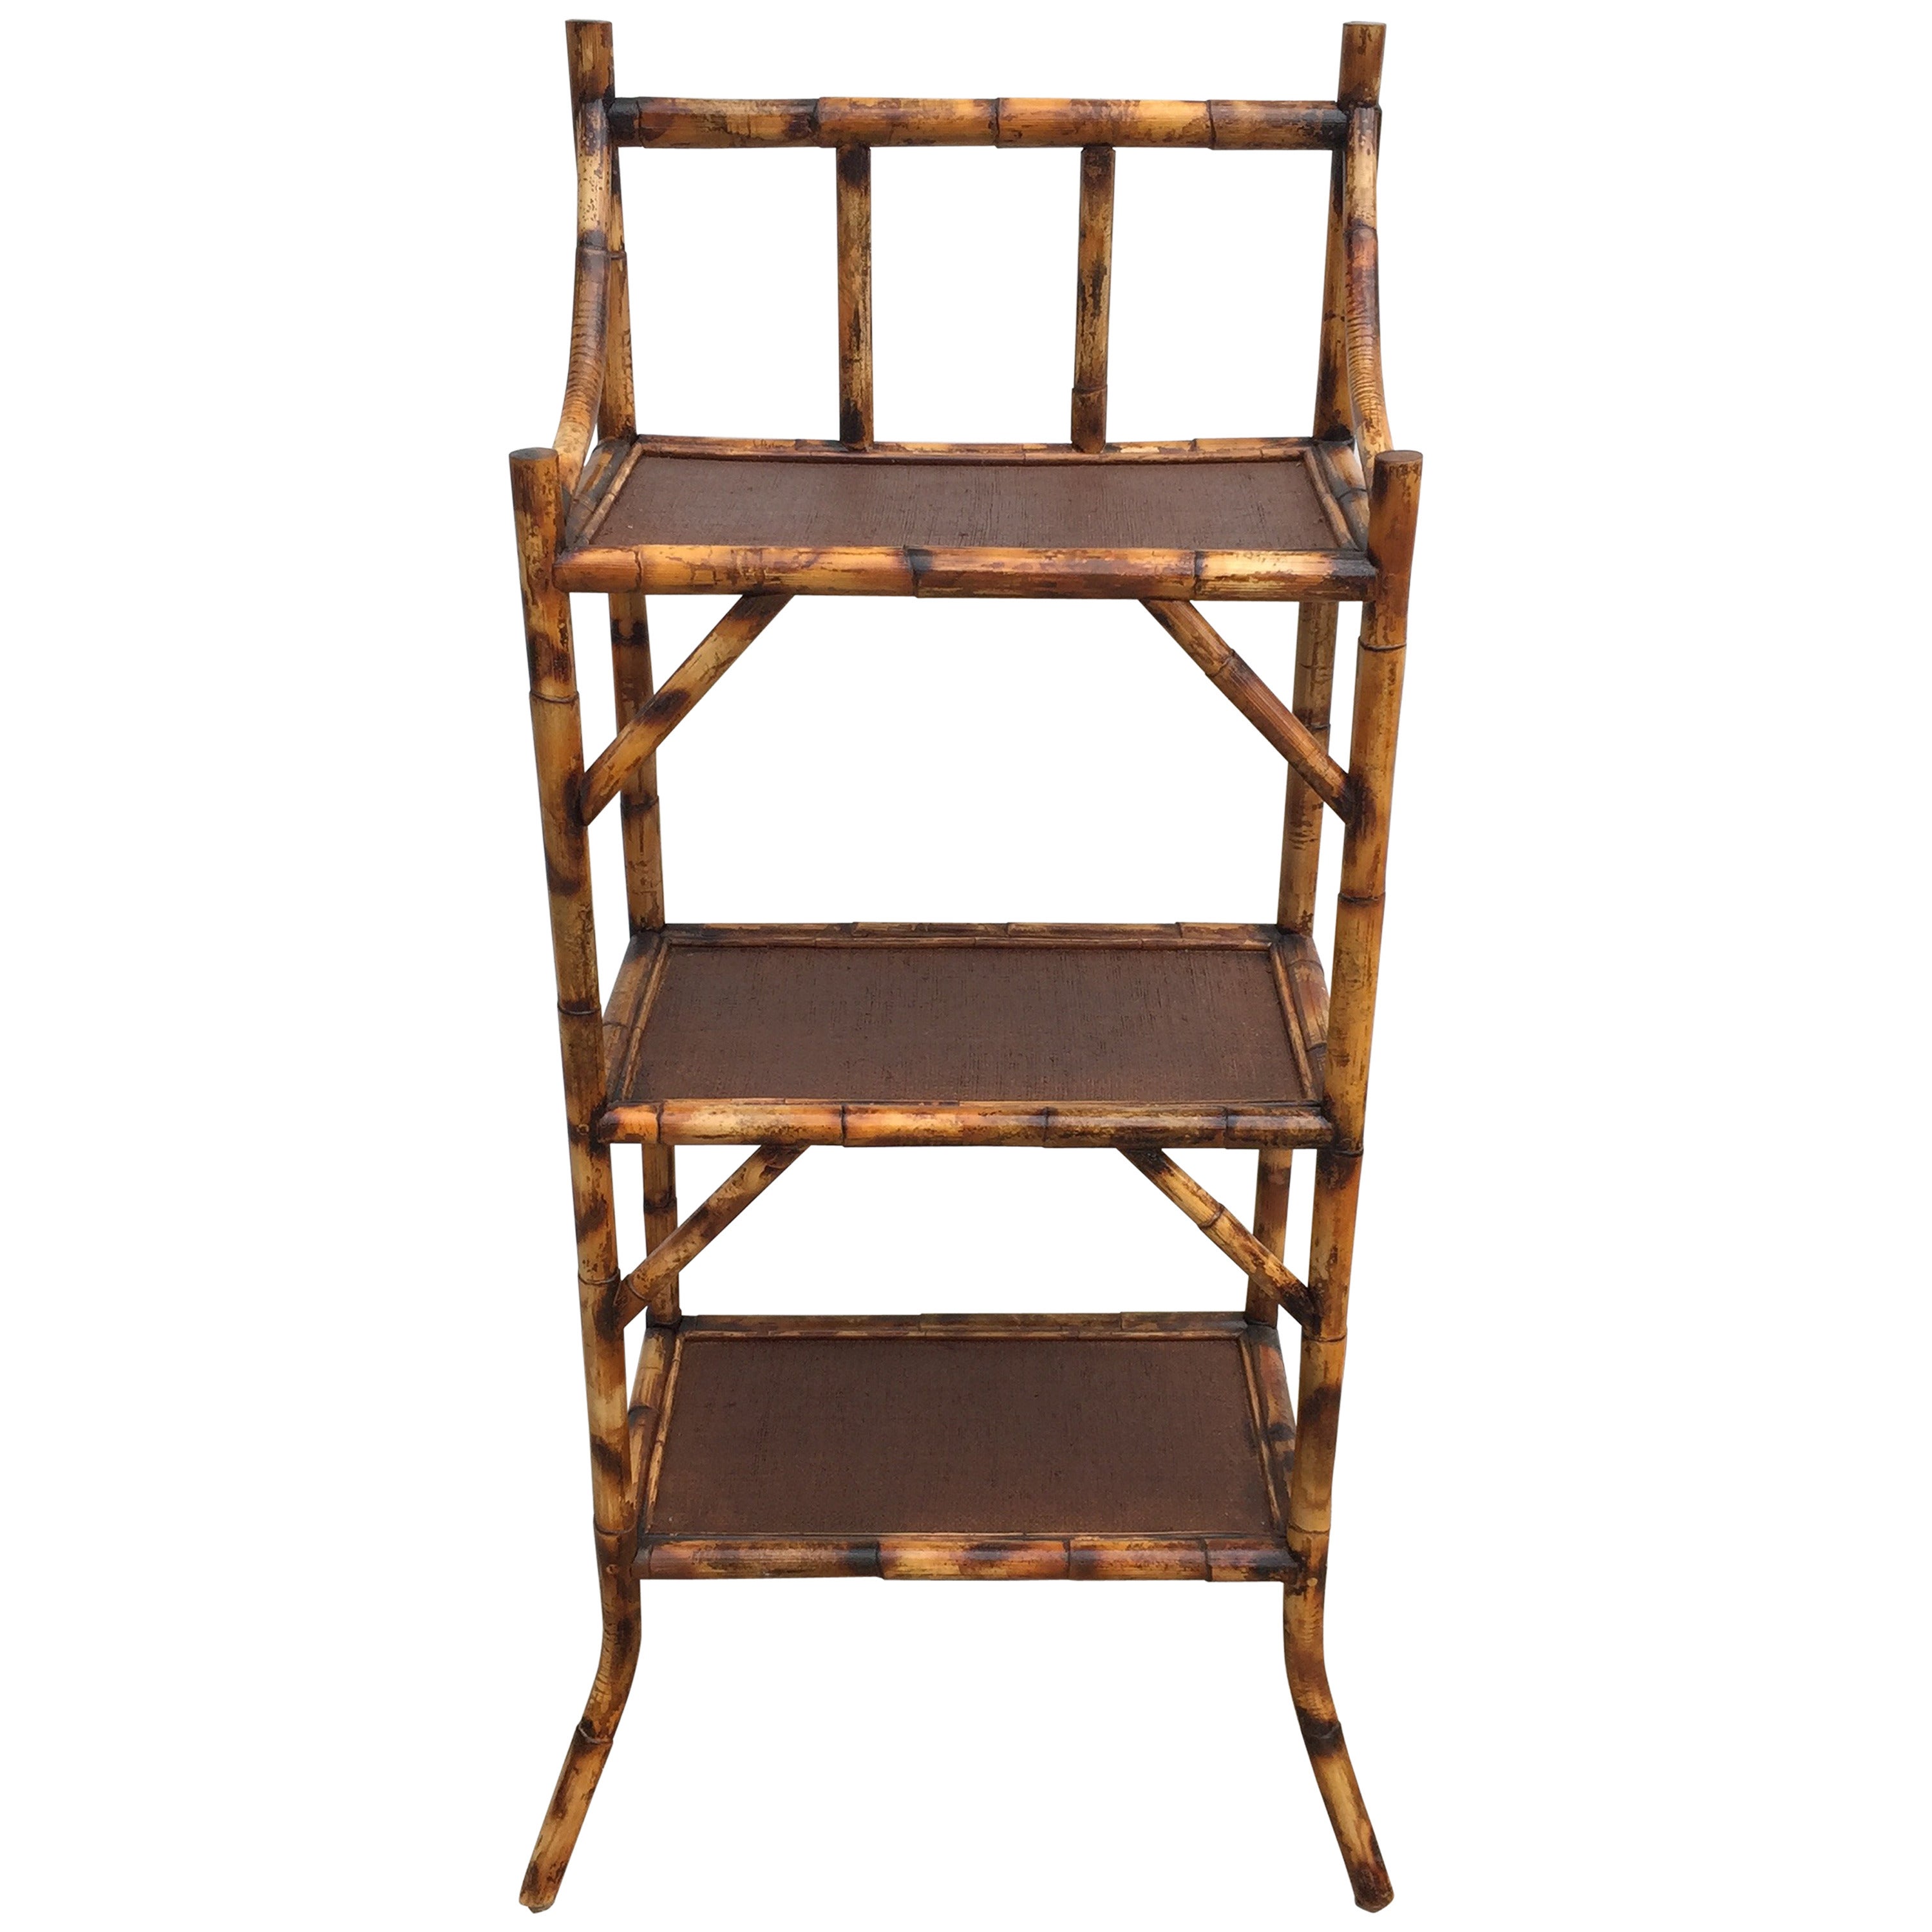 Three-Tiered Scorched Bamboo Etagere with Espresso Rattan Shelves